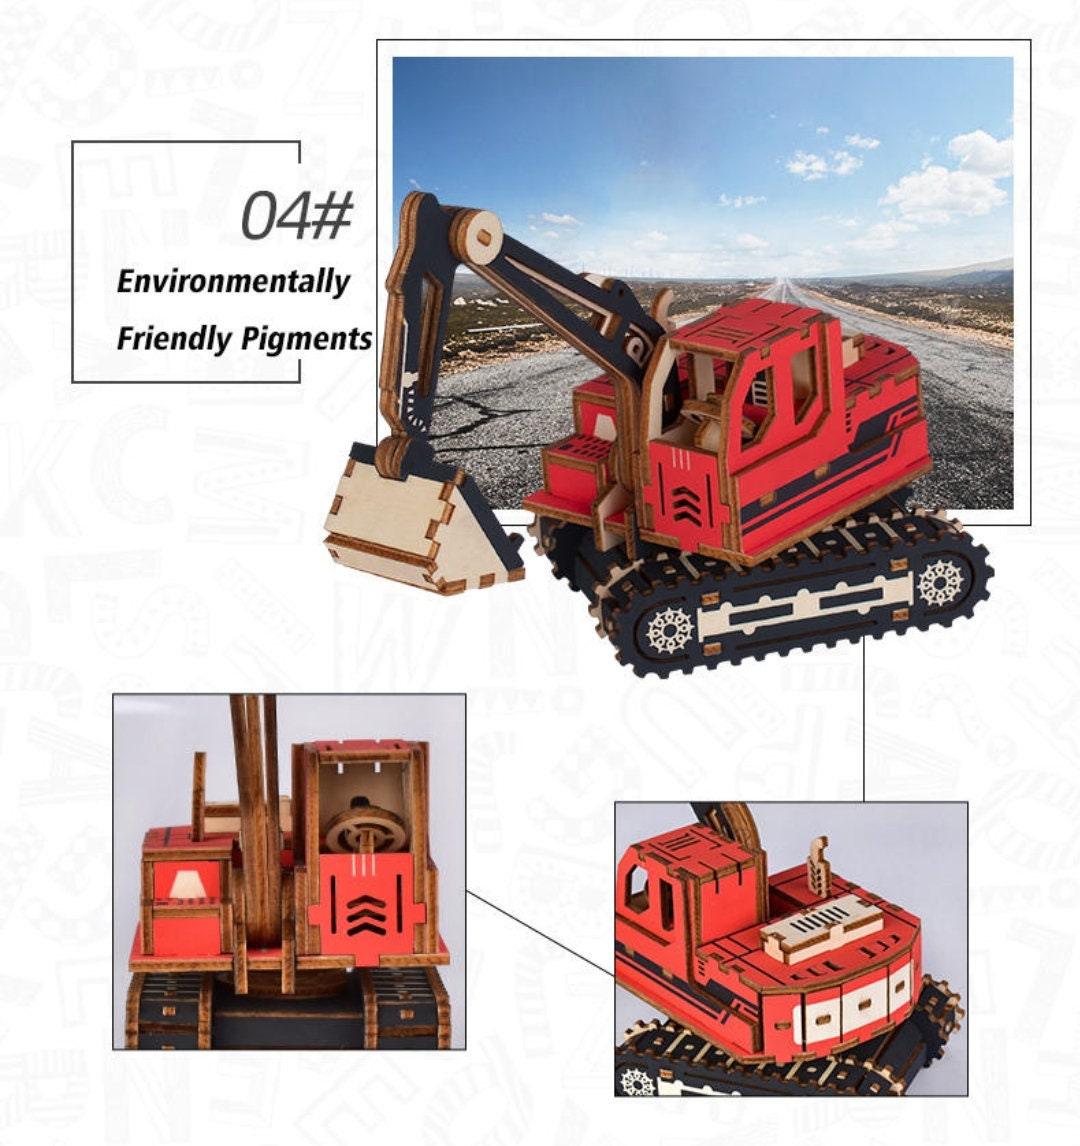 DIY Wooden Mechanical Puzzles - Engineering Vehicles Puzzle Toys - 4 Types of construction vehicles Wooden Puzzles Educational Toy